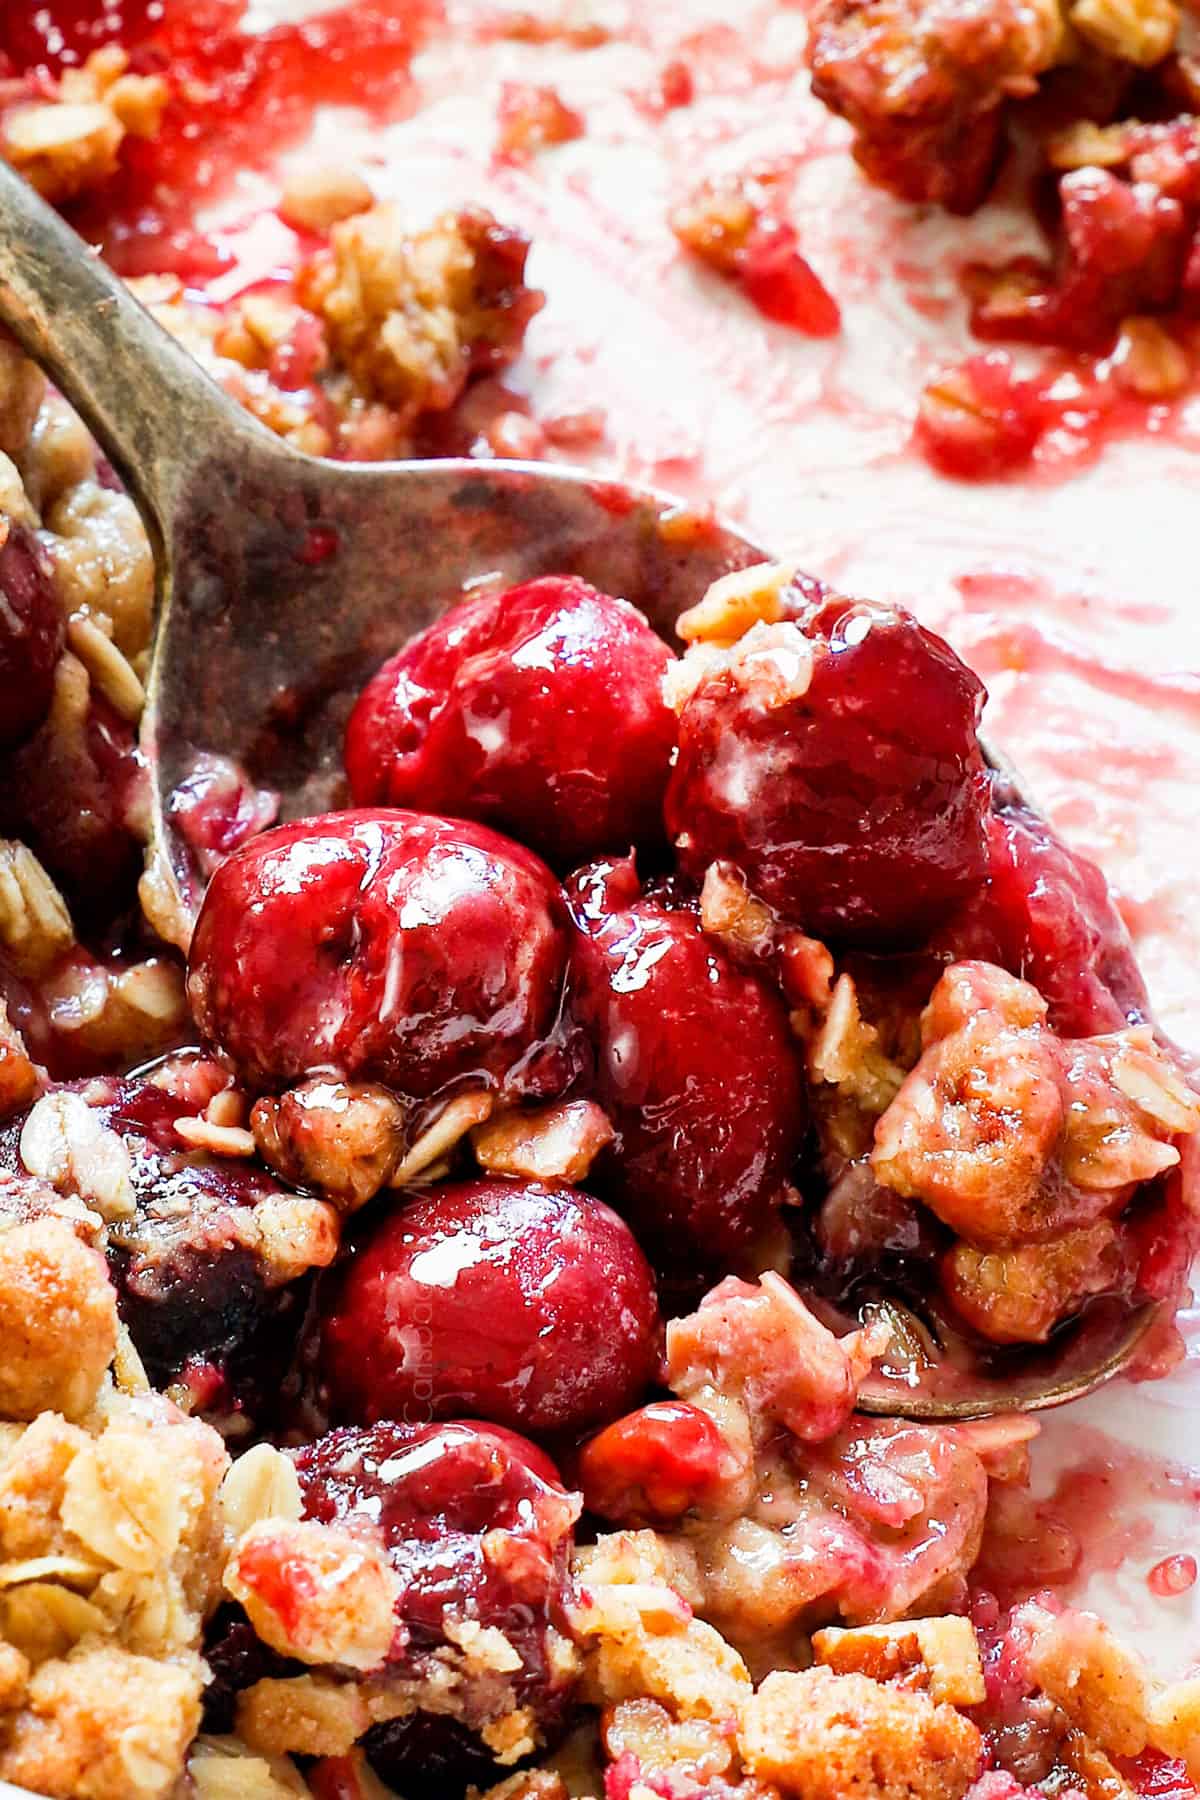 up close of a spoon serving cherry crisp with fresh cherries showing how saucy it is